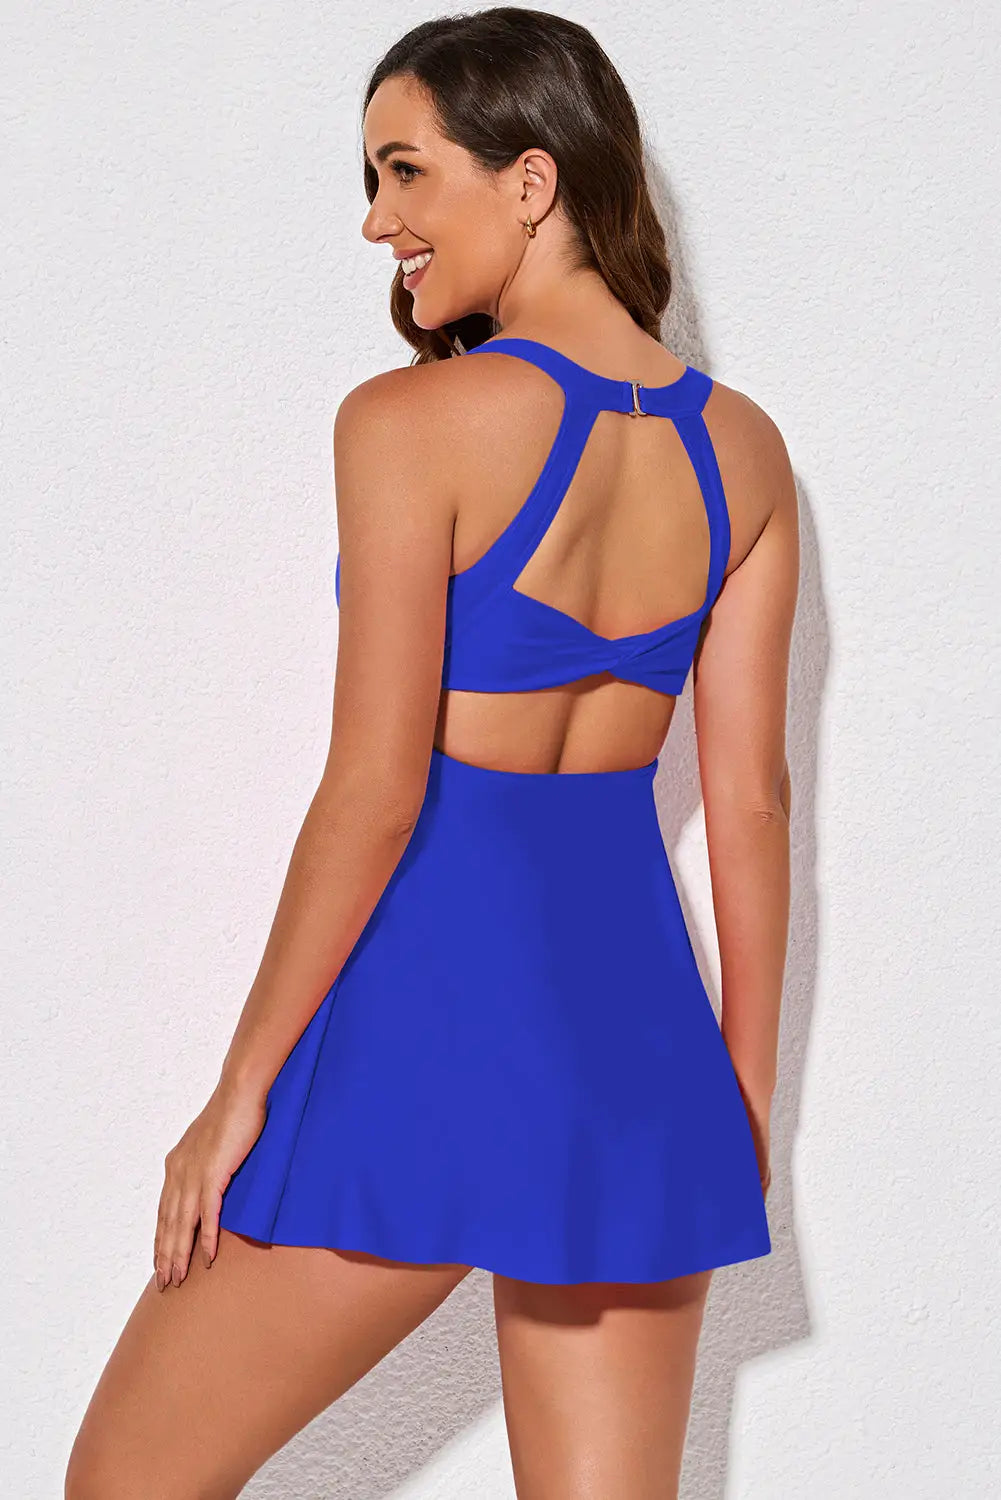 Blue strappy halterneck skirt style one piece swimsuit - swimsuits